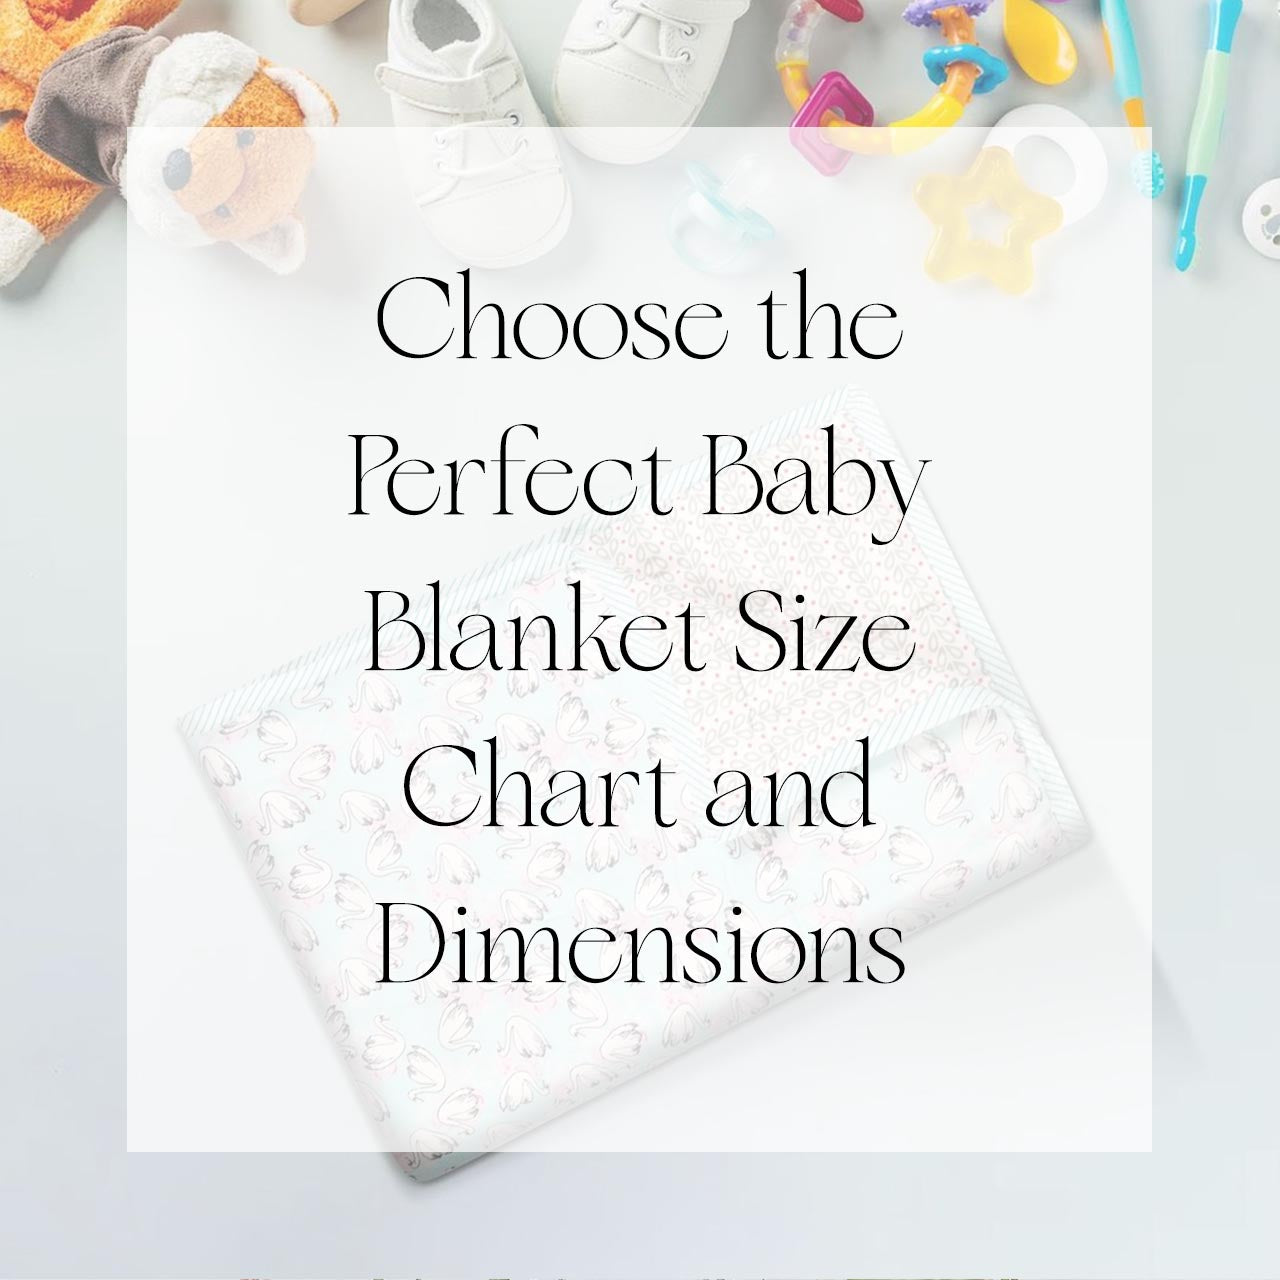 Choose the Perfect Baby Blanket Size Chart and Dimensions